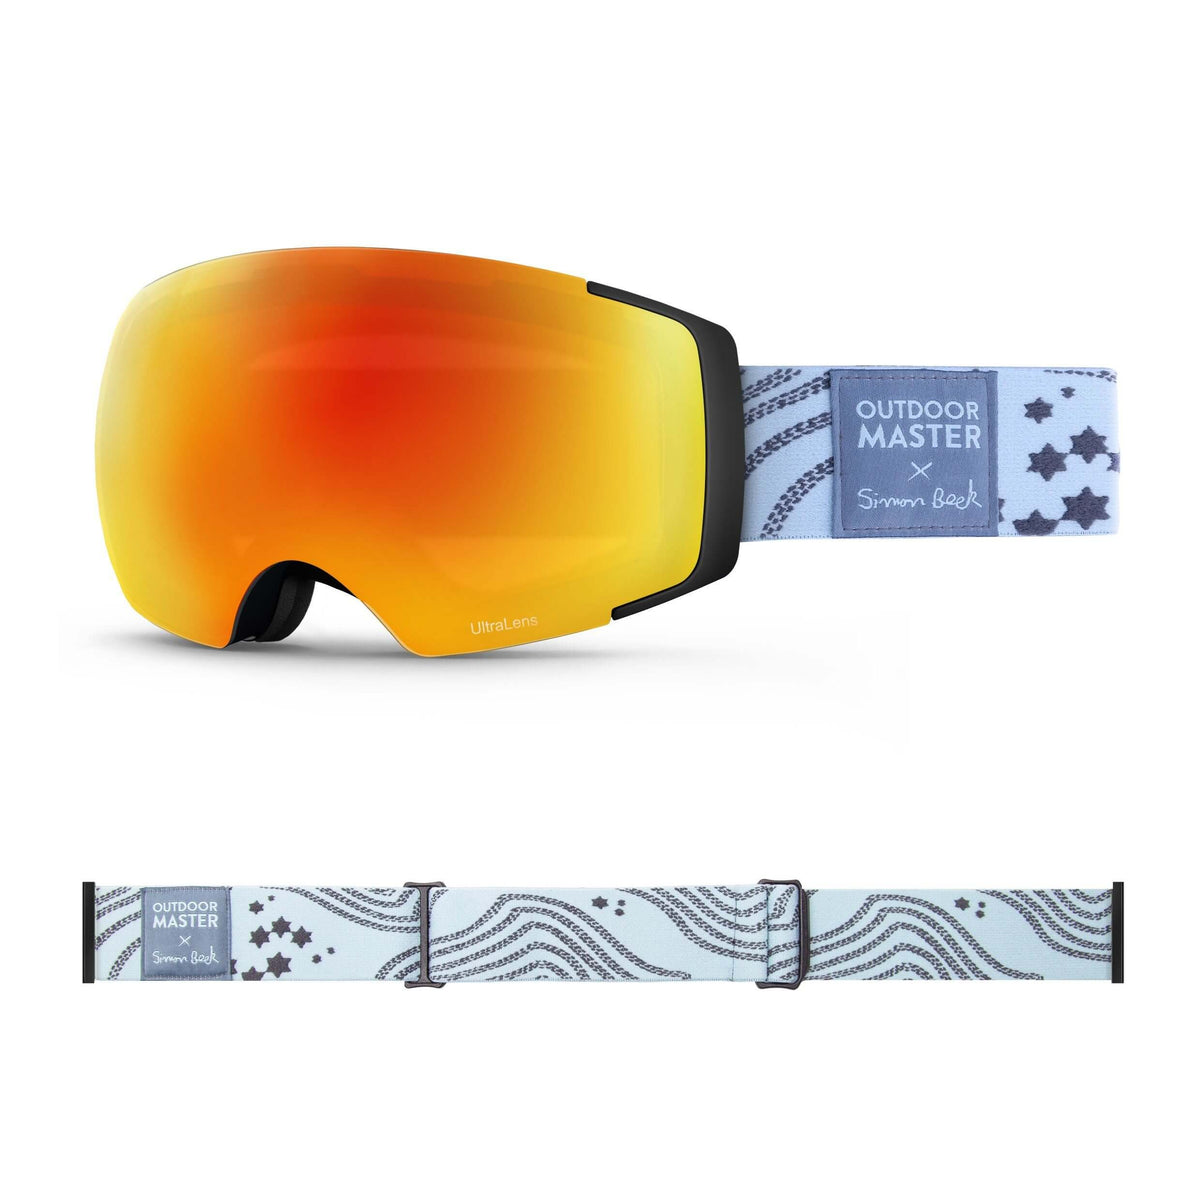 OutdoorMaster x Simon Beck Ski Goggles Pro Series - Snowshoeing Art Limited Edition OutdoorMaster UltraLens VLT 25% Optimized Orange with REVO Red Star Road-Lightsteelblue